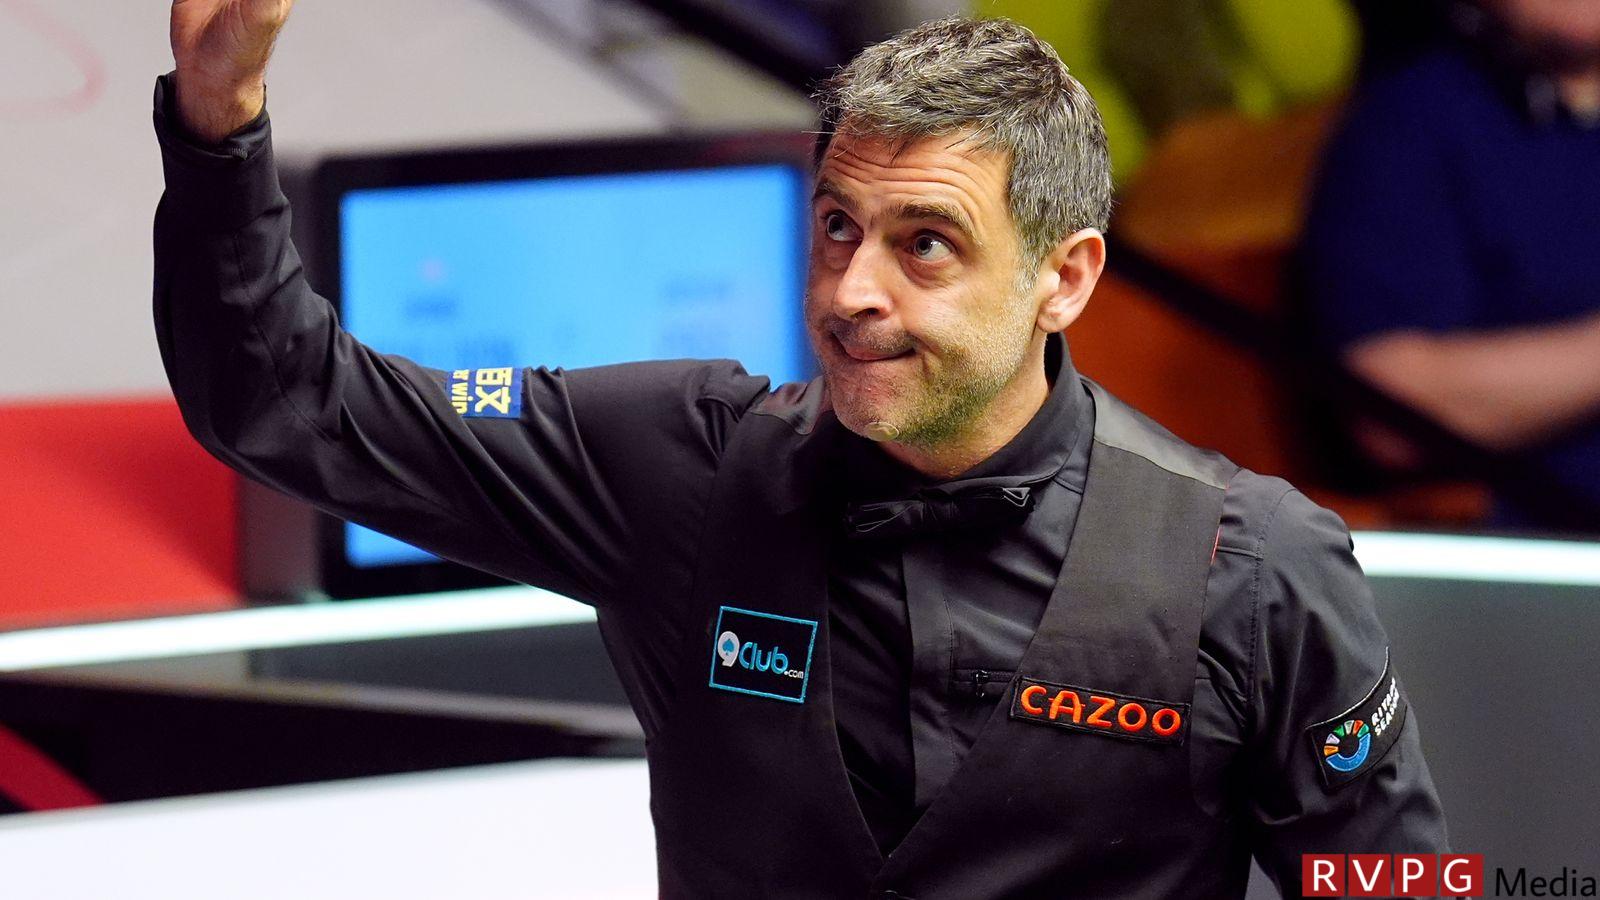 Ronnie O'Sullivan says he 'broke the rules of snooker': 'Can I win a world championship at 50?' Let's experiment'